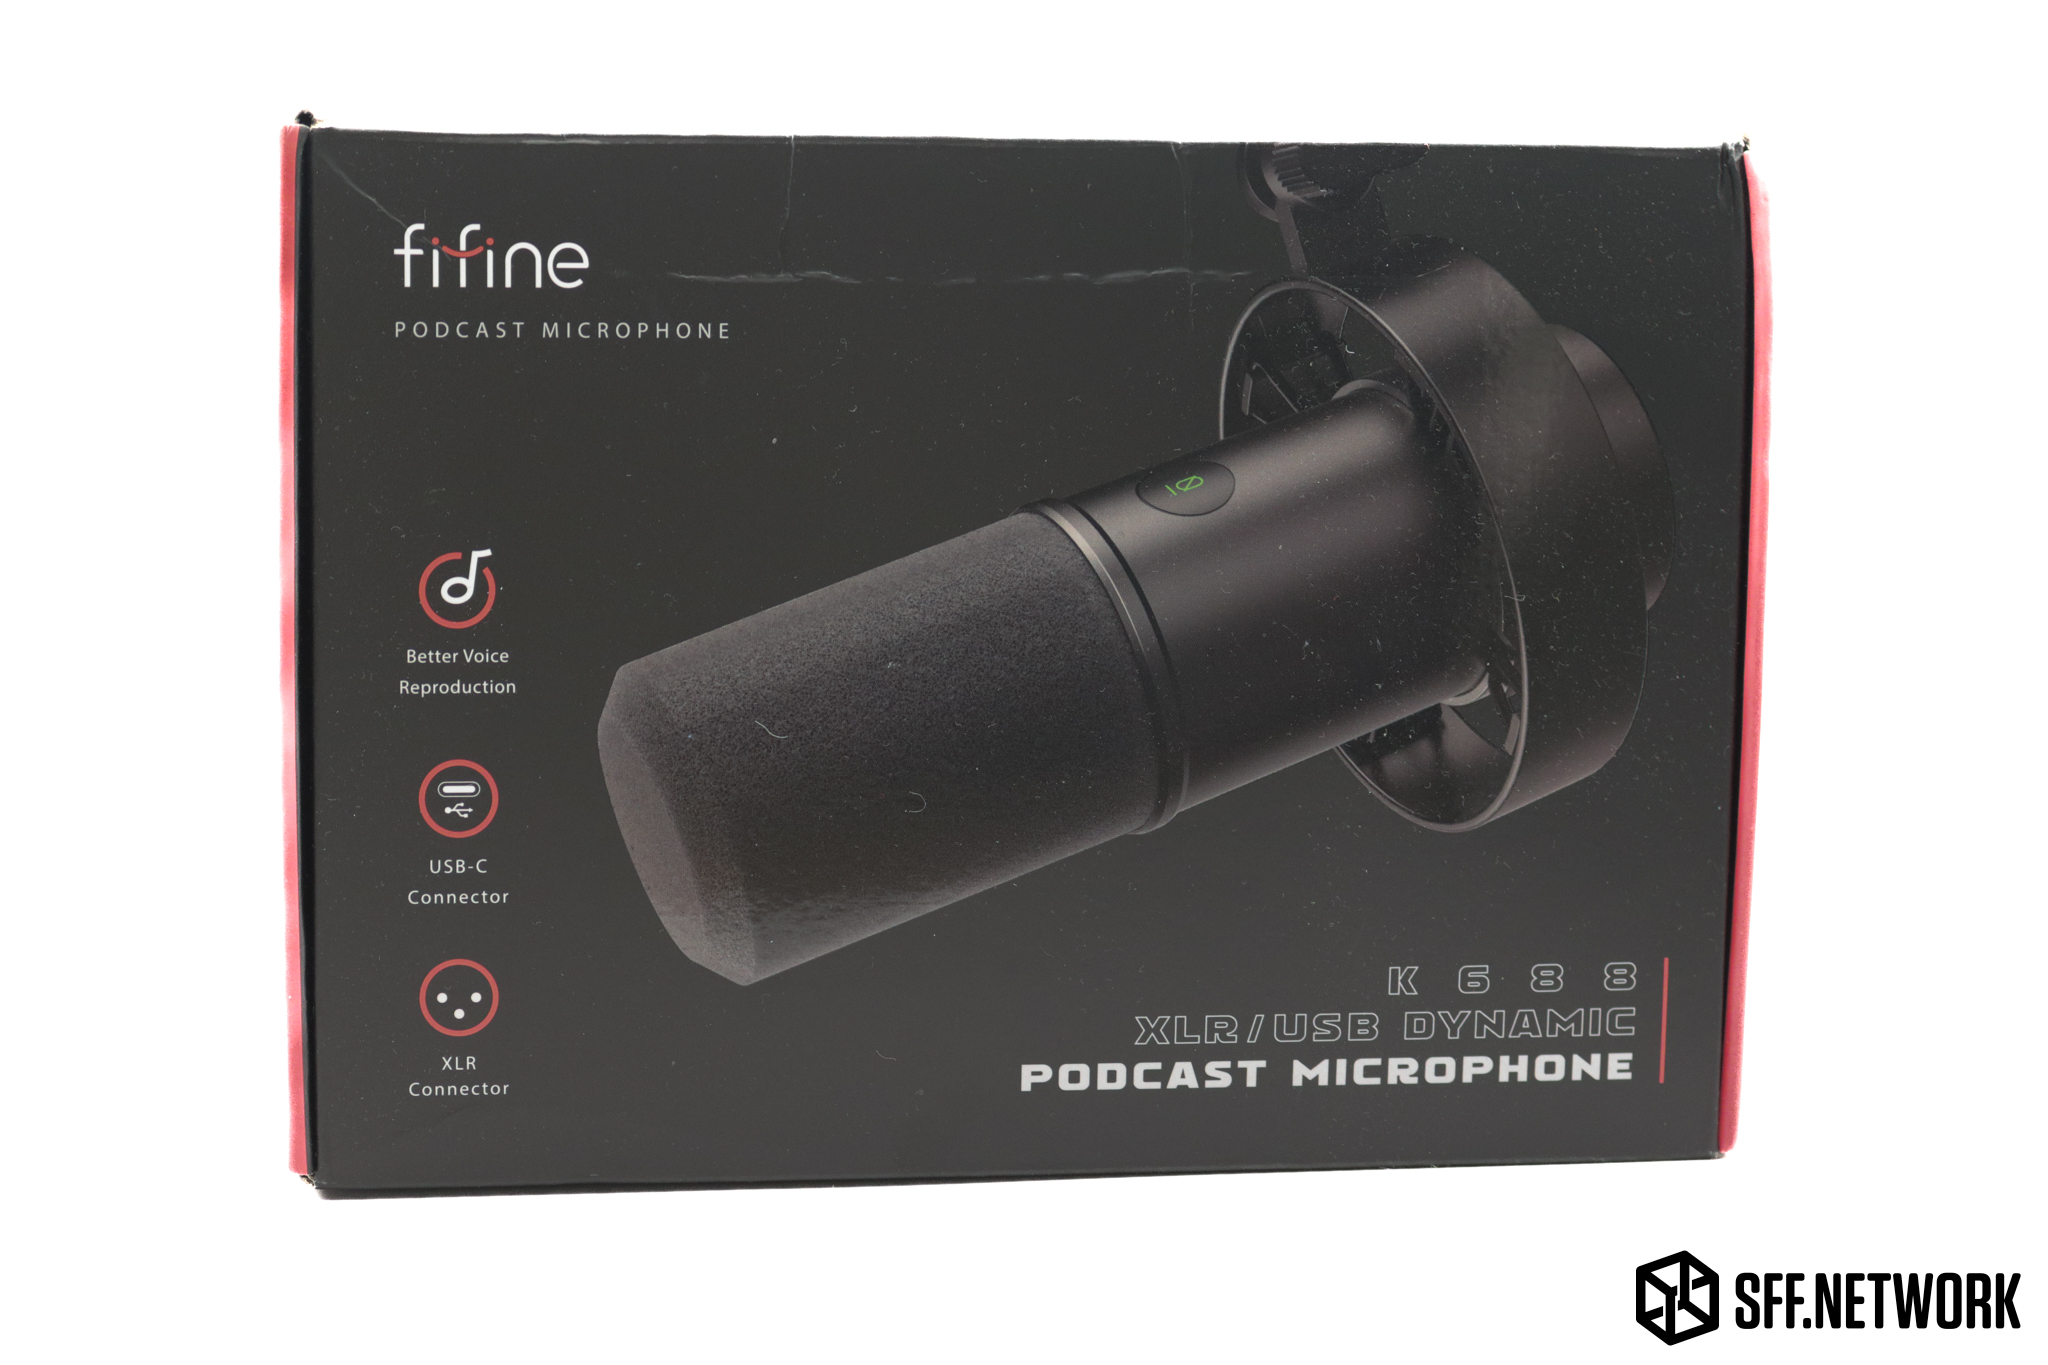 FIFINE's K688 USB/XLR Microphone – Streamer's Special or Bargain Basement?  – SFF.Network